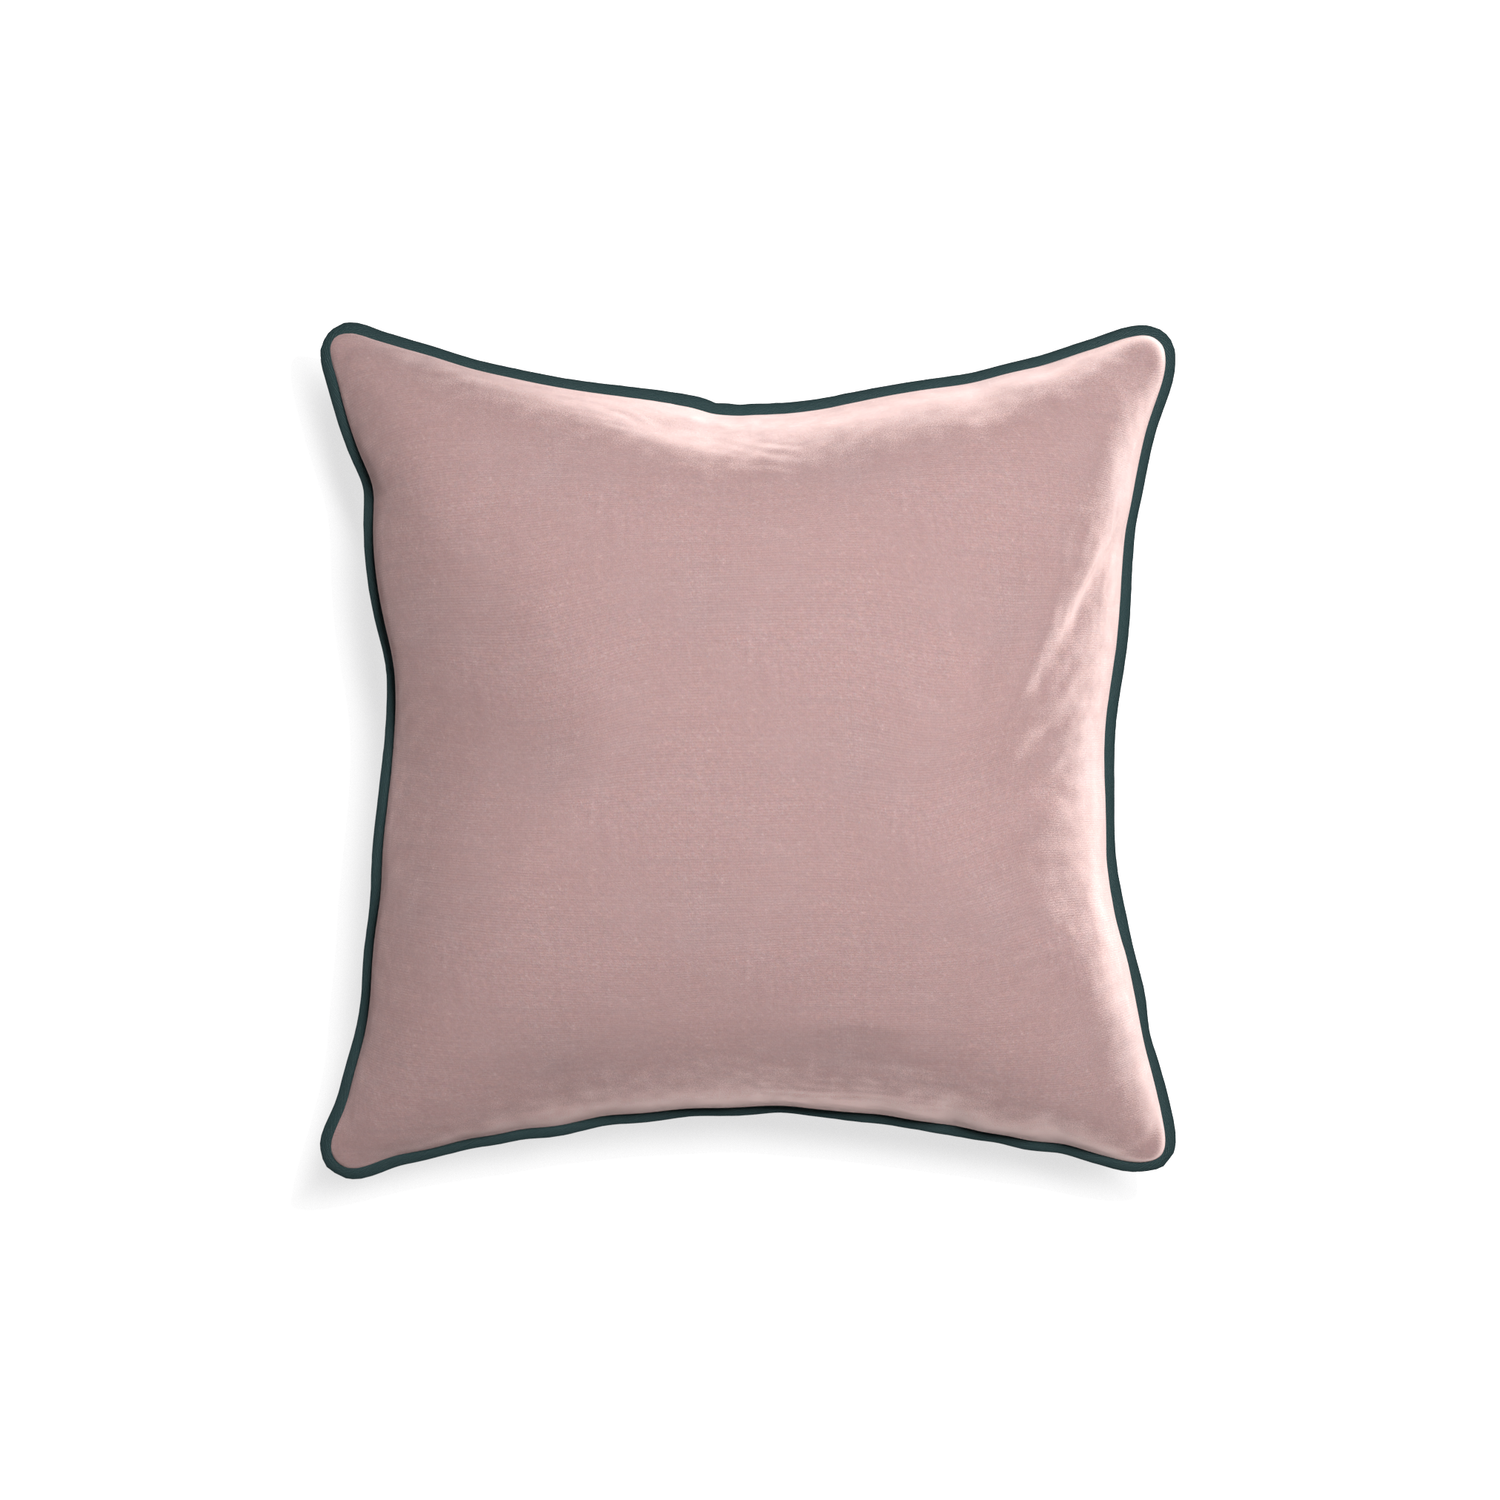 18-square mauve velvet custom mauvepillow with p piping on white background